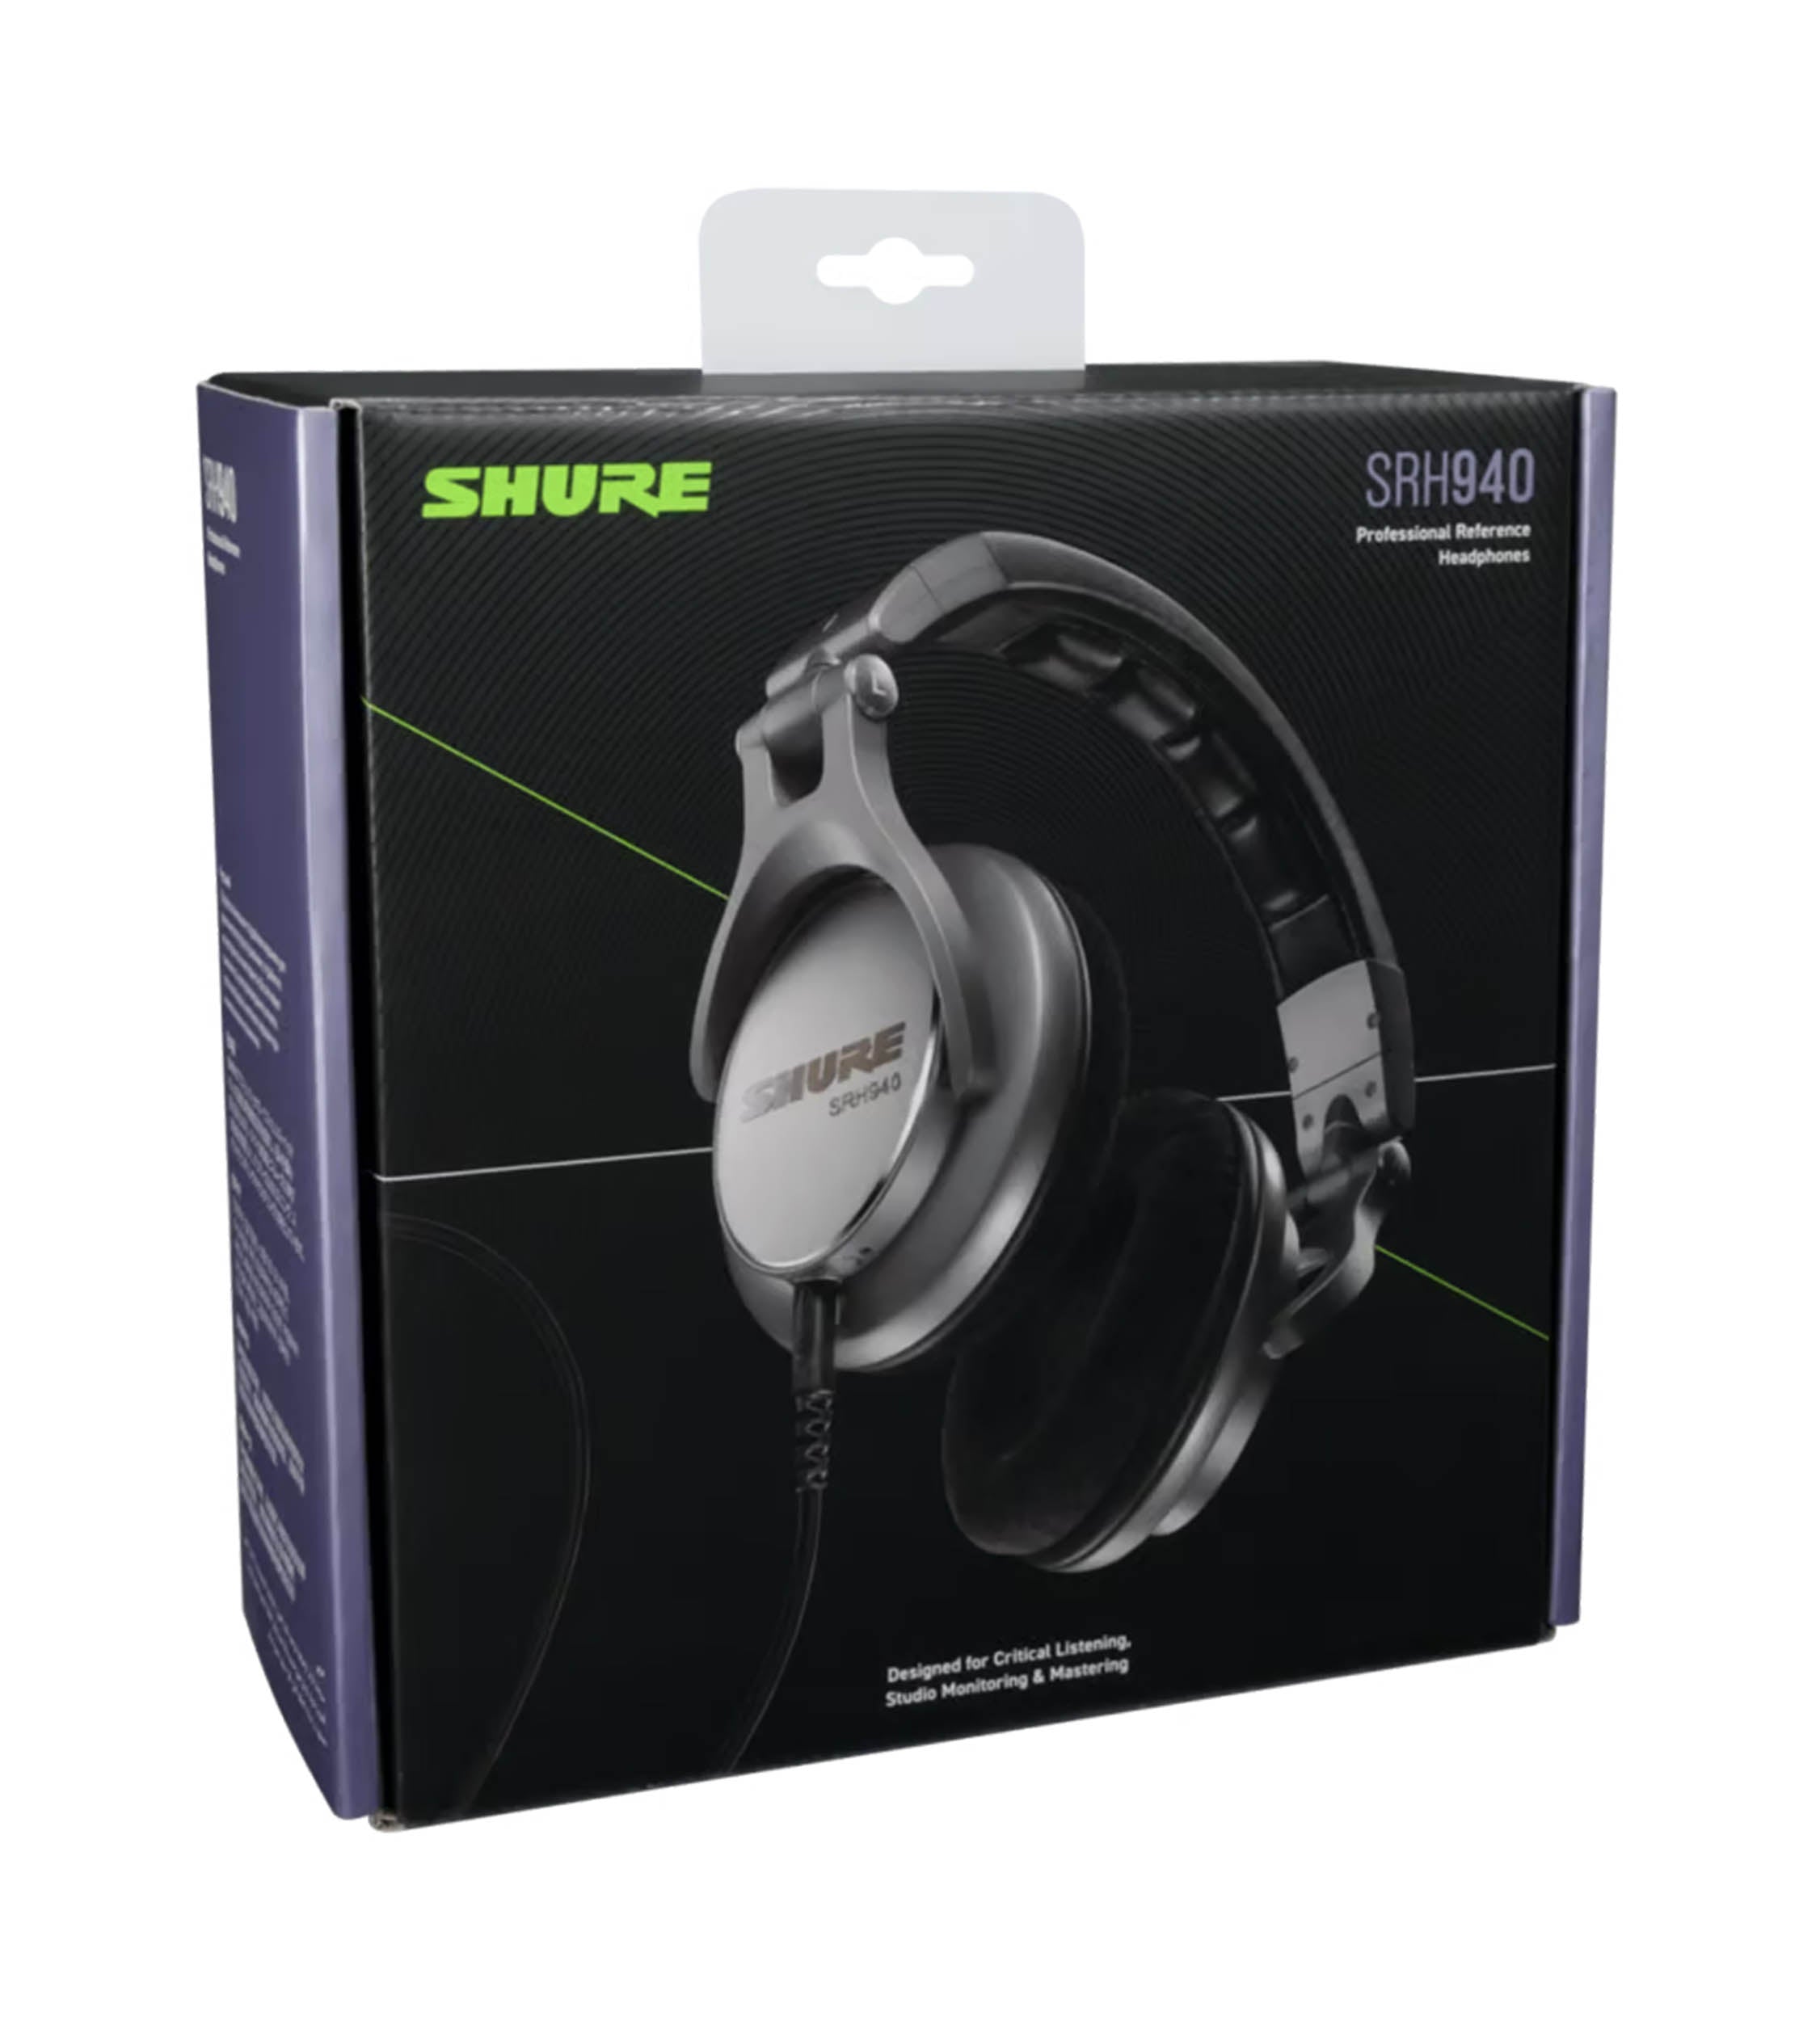 B-Stock: Shure SRH940 Professional Reference Headphones by Shure